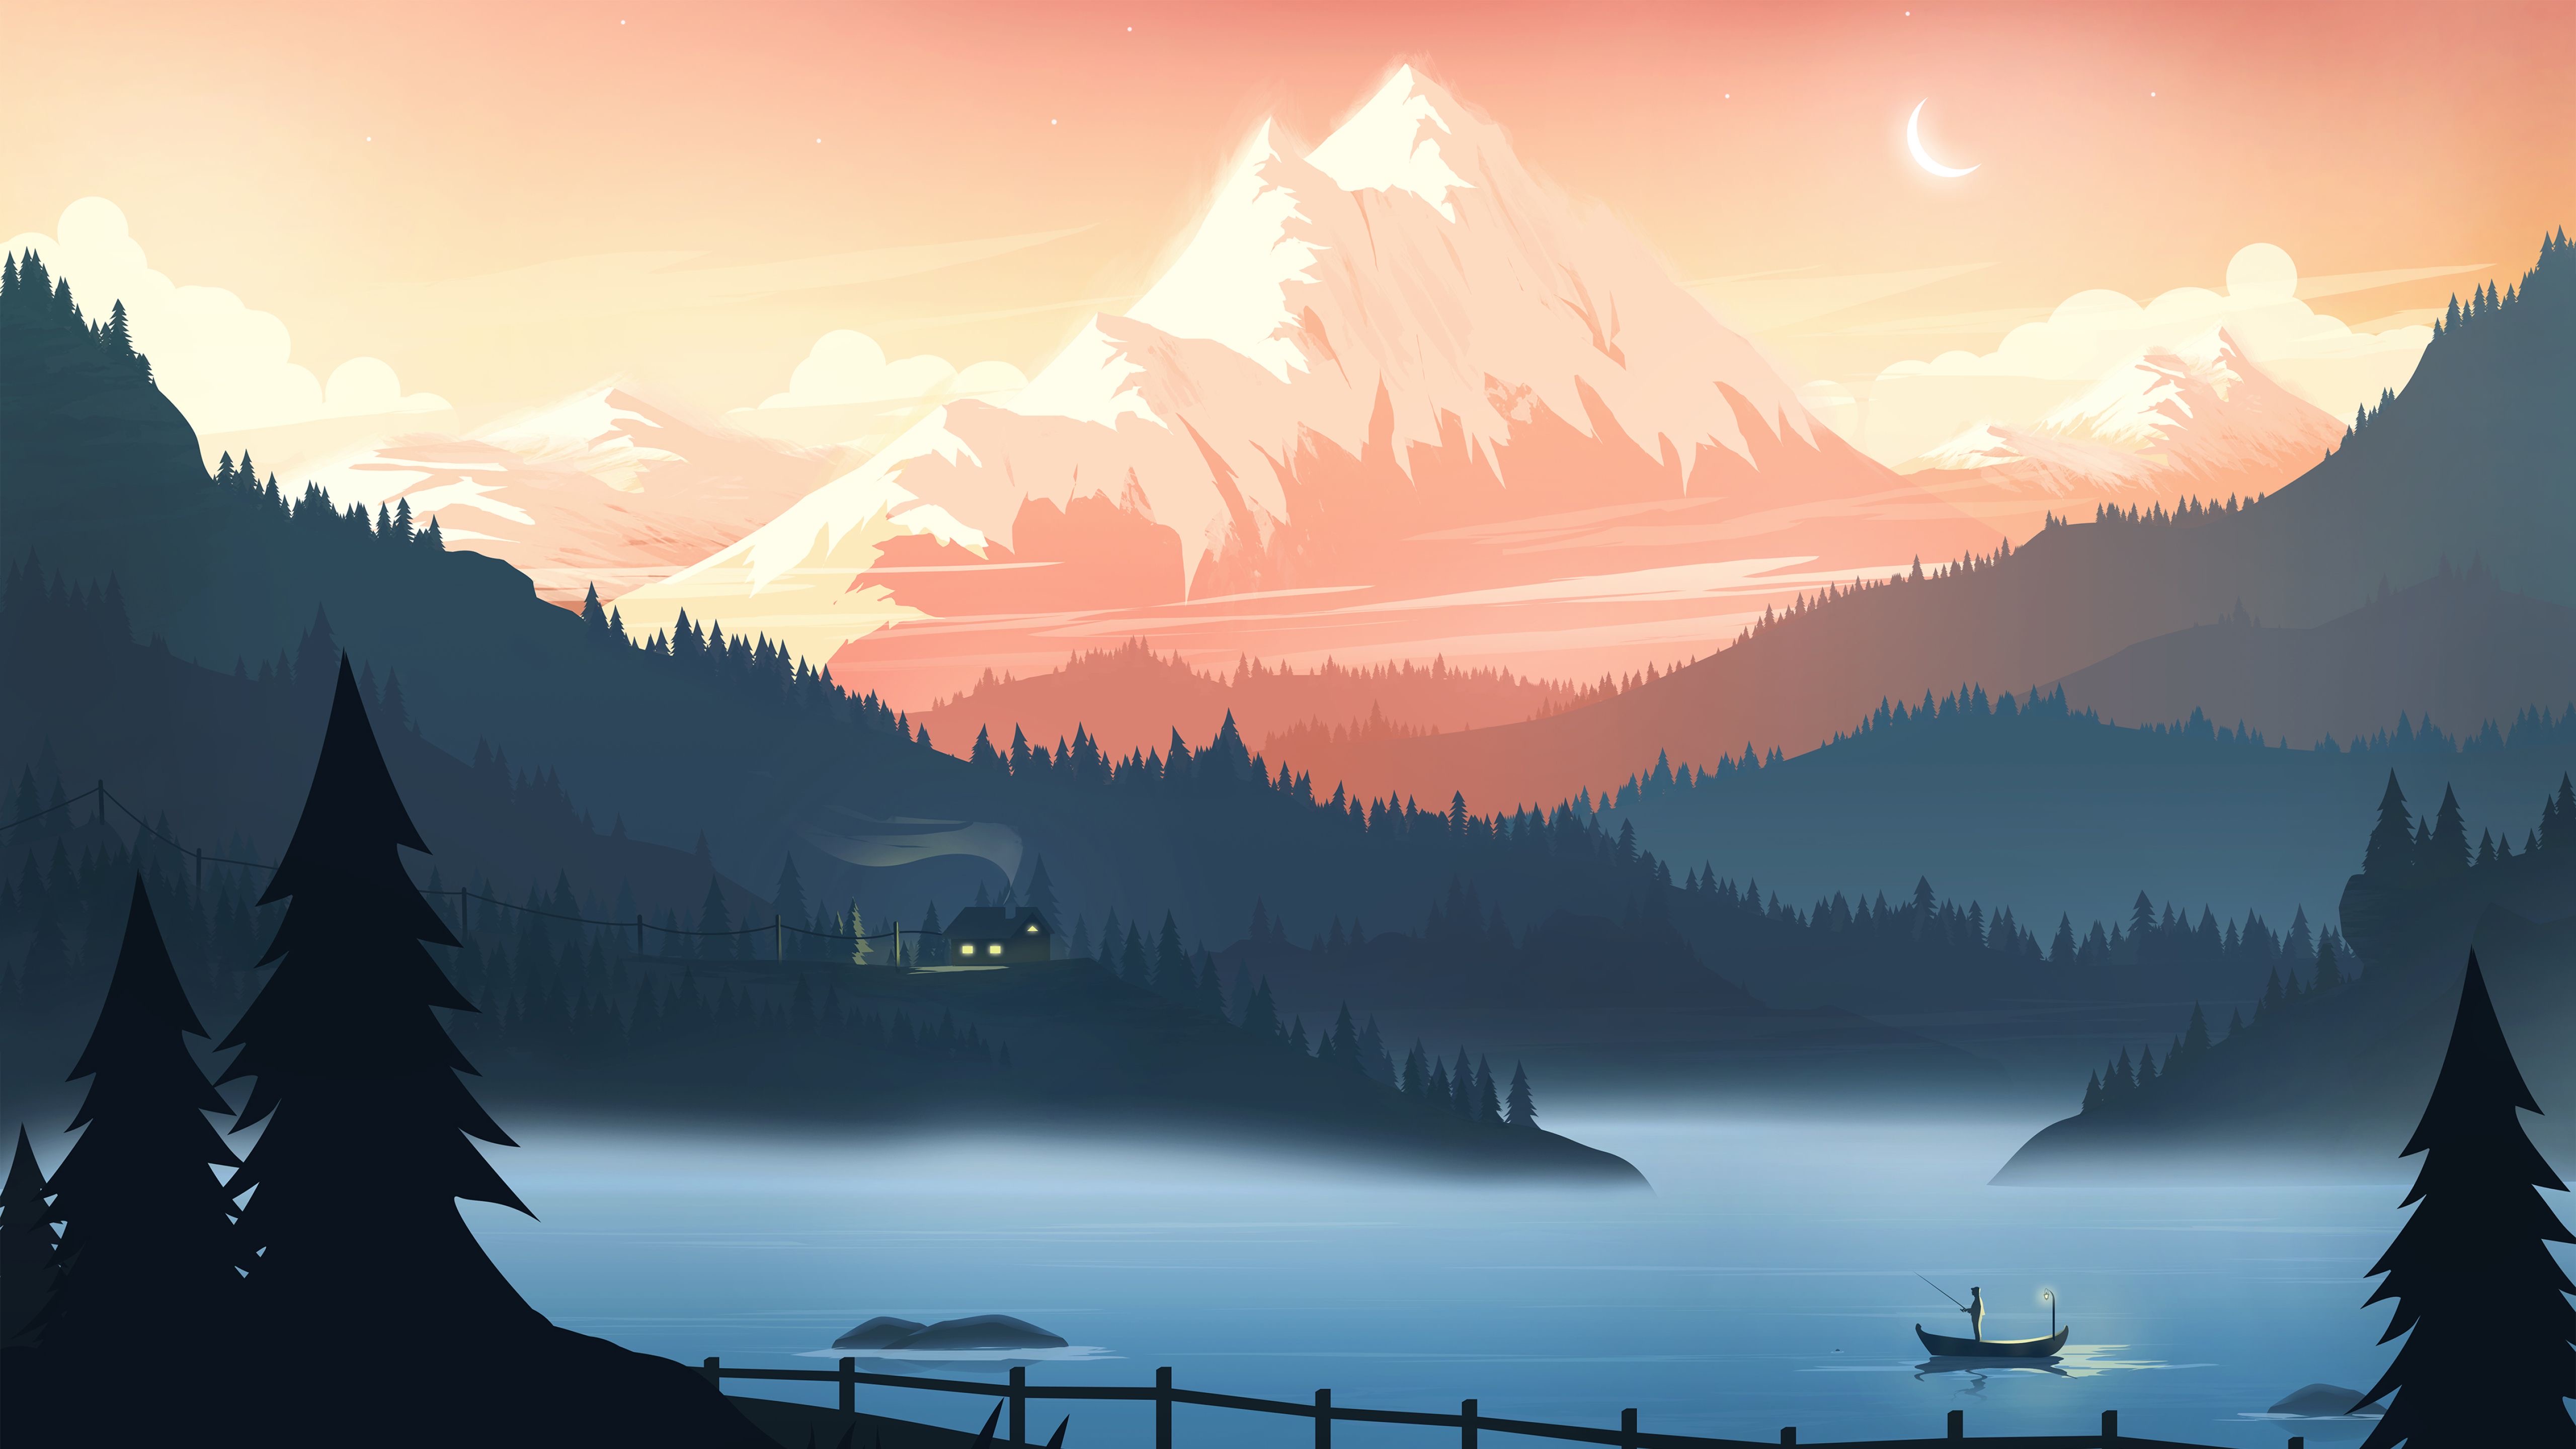 Digital Art River Mountains Landscape Mist Calm Waters Water Nature Lake Forest Artwork 5120x2880